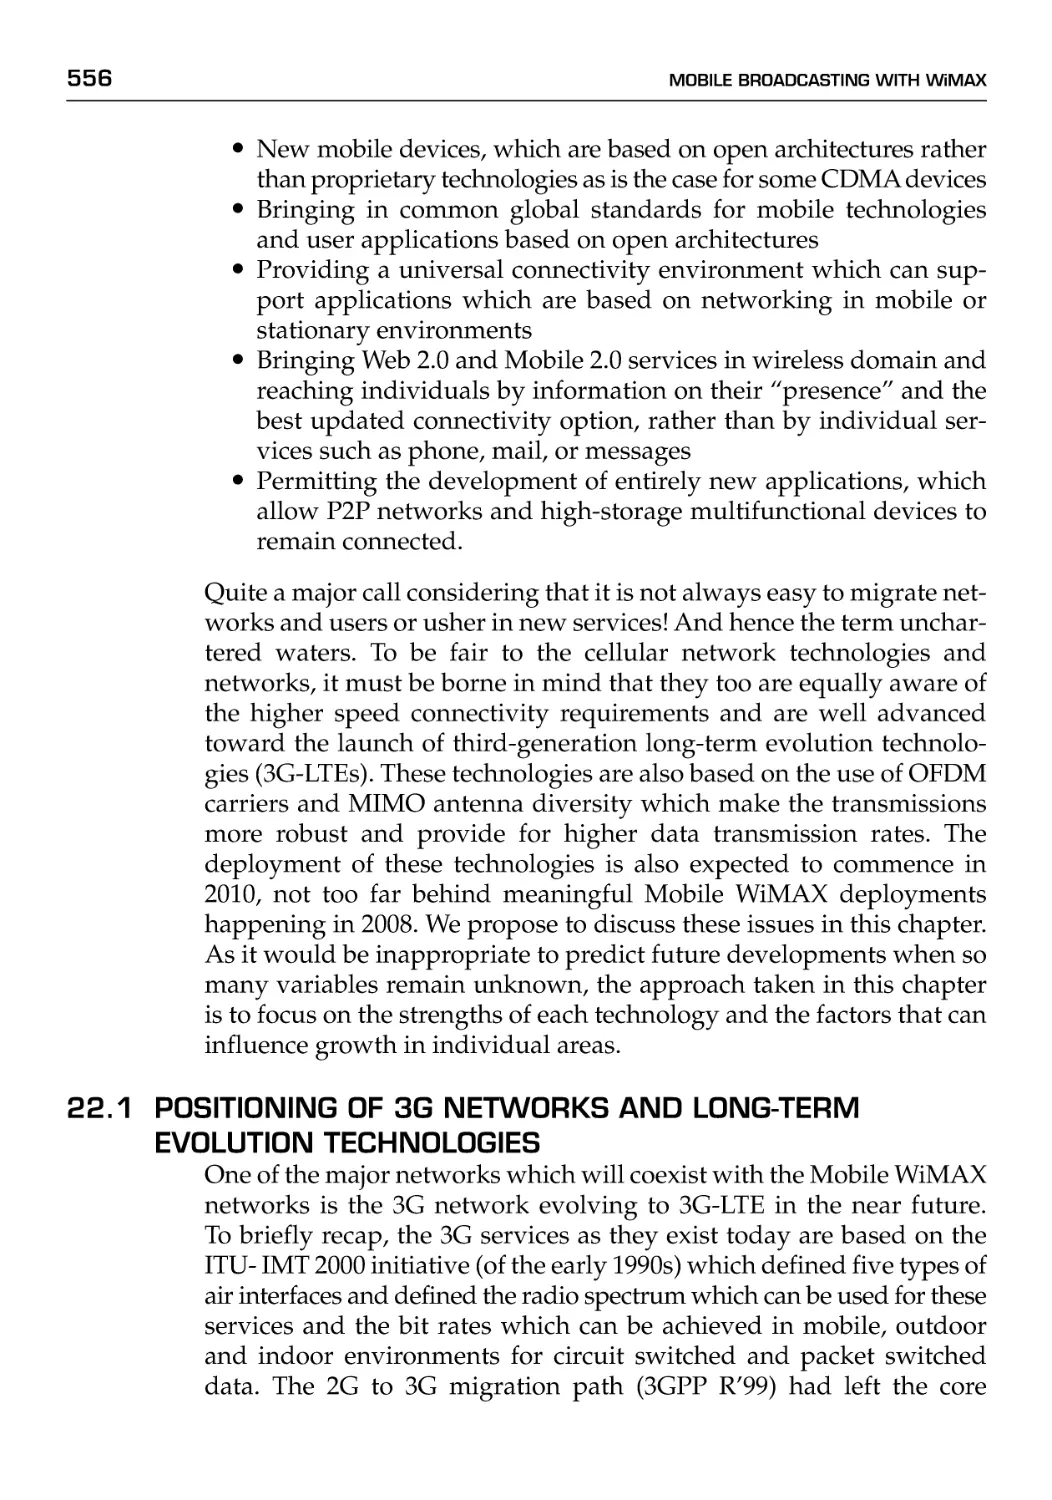 22.1 Positioning of 3G Networks and Long-Term Evolution Technologies